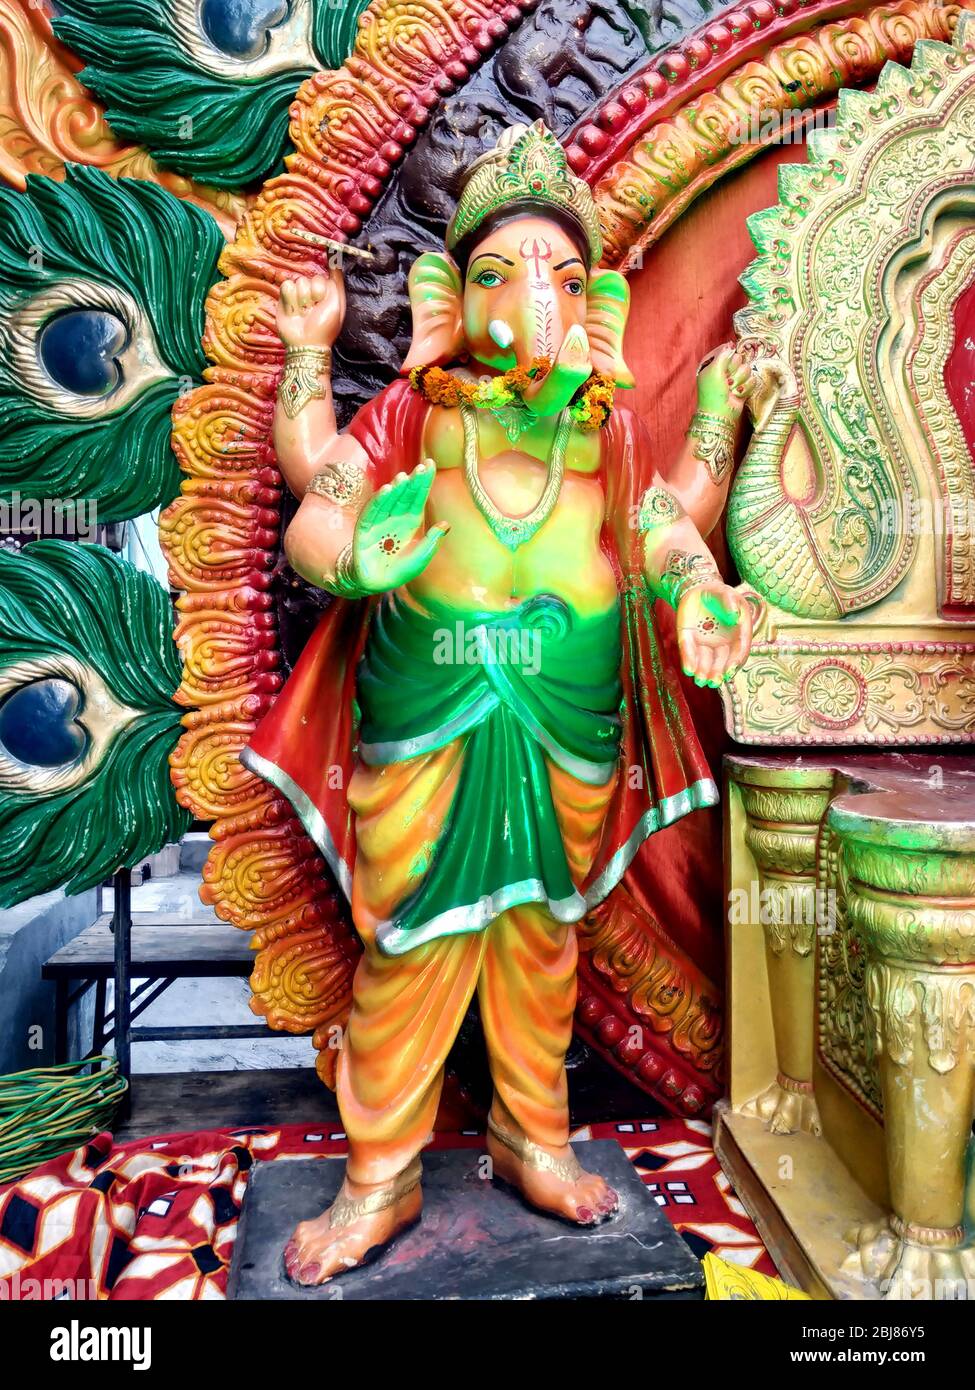 Ganesha statue in a large standing position. Ganesh is the god of ...